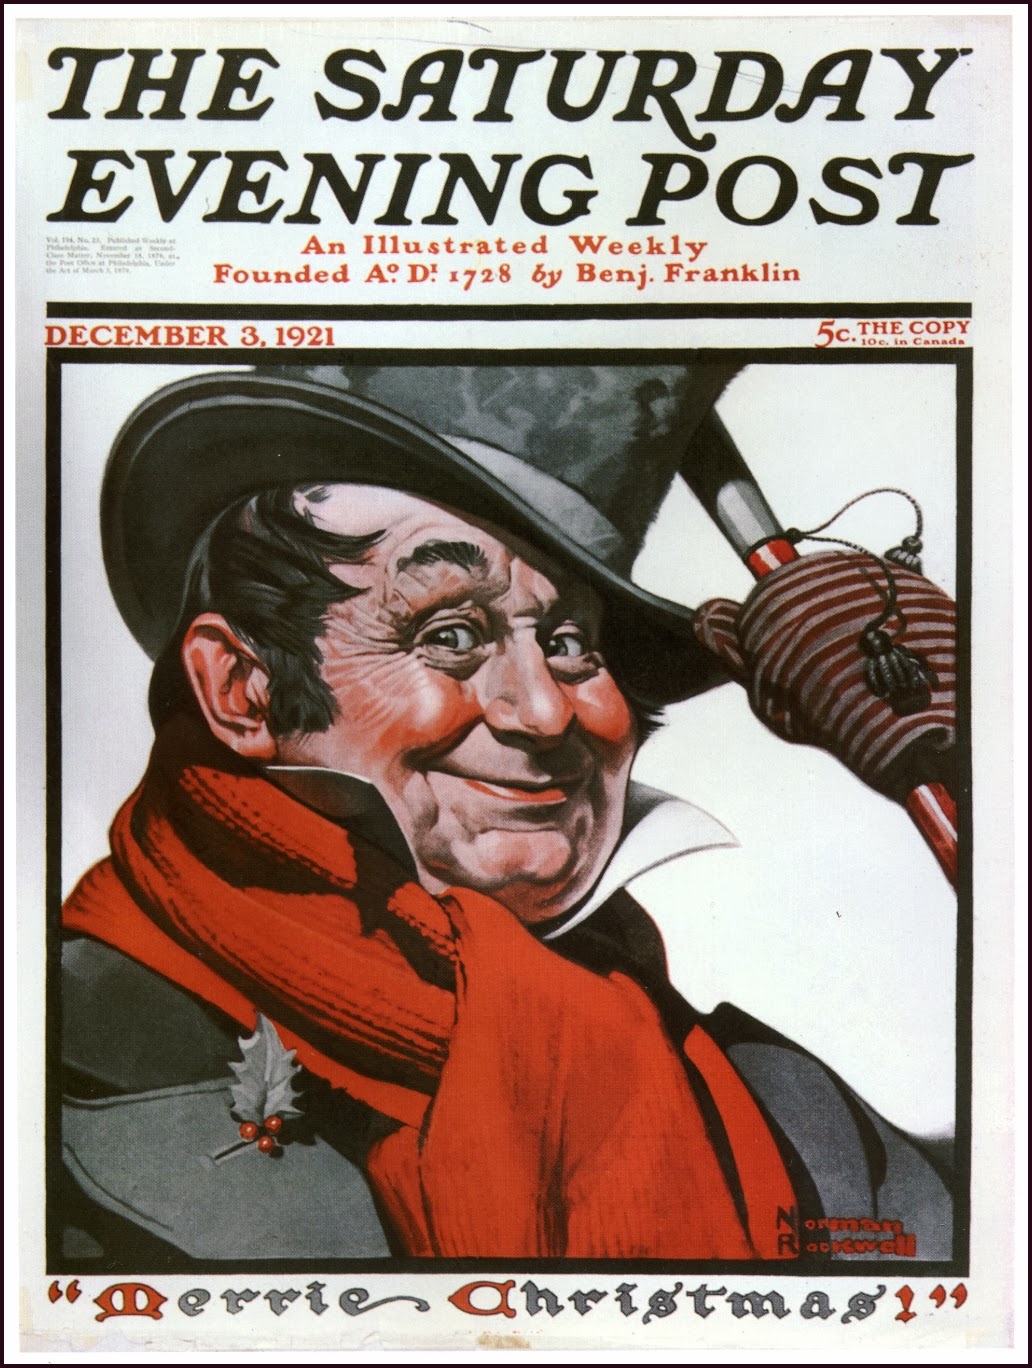 NORMAN ROCKWELL, The Saturday Evening Post Covers | Null ...